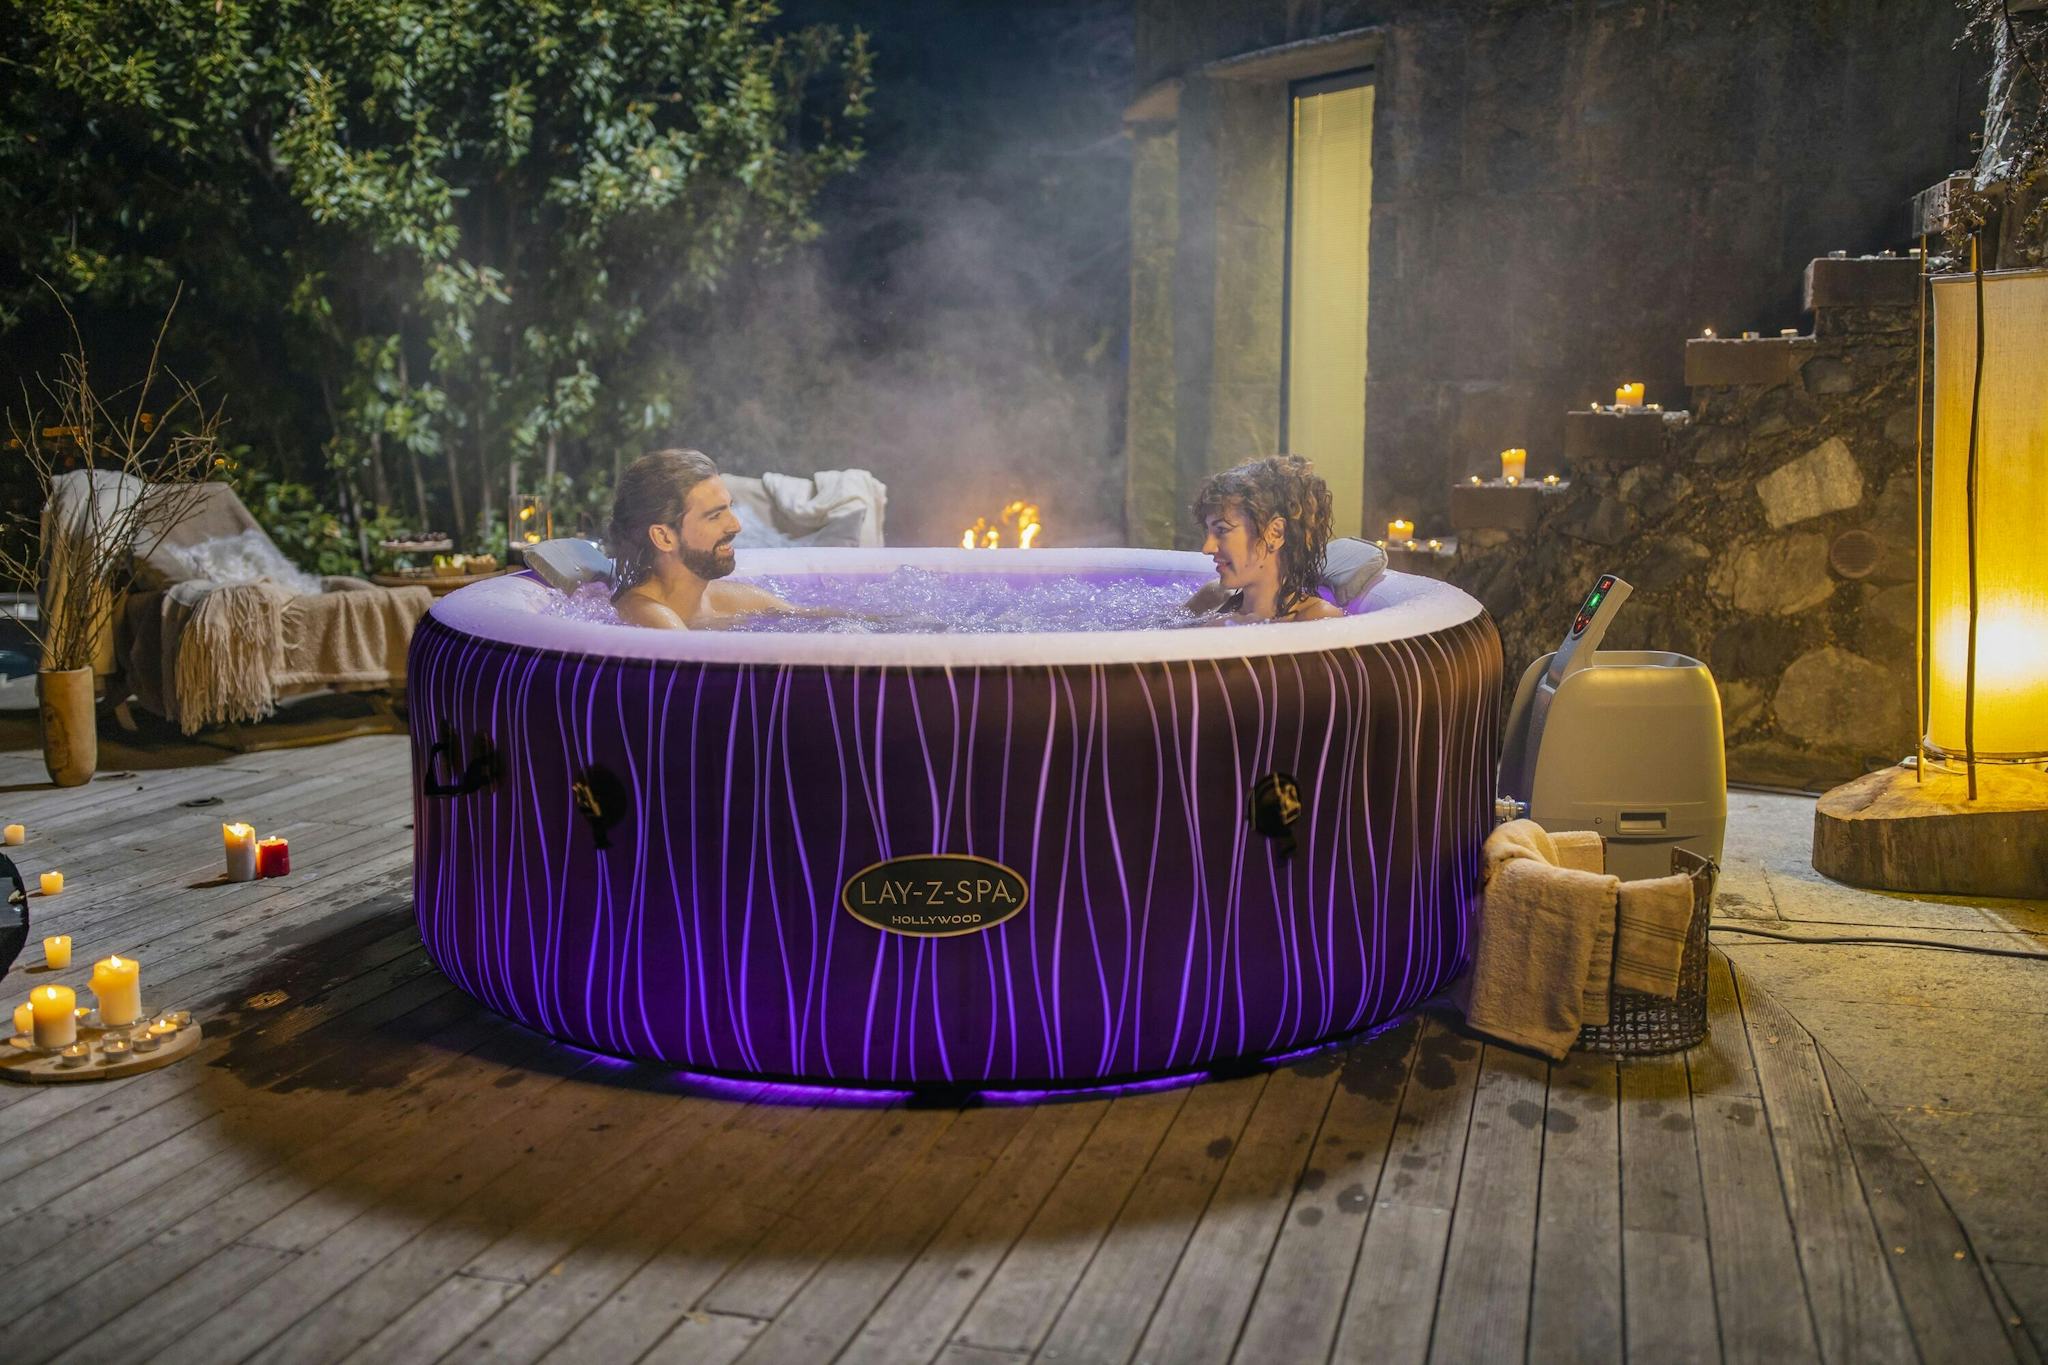 Spas Gonflables Spa gonflable rond Lay-Z-Spa Hollywood Airjet™ 4 - 6 personnes Bestway 6